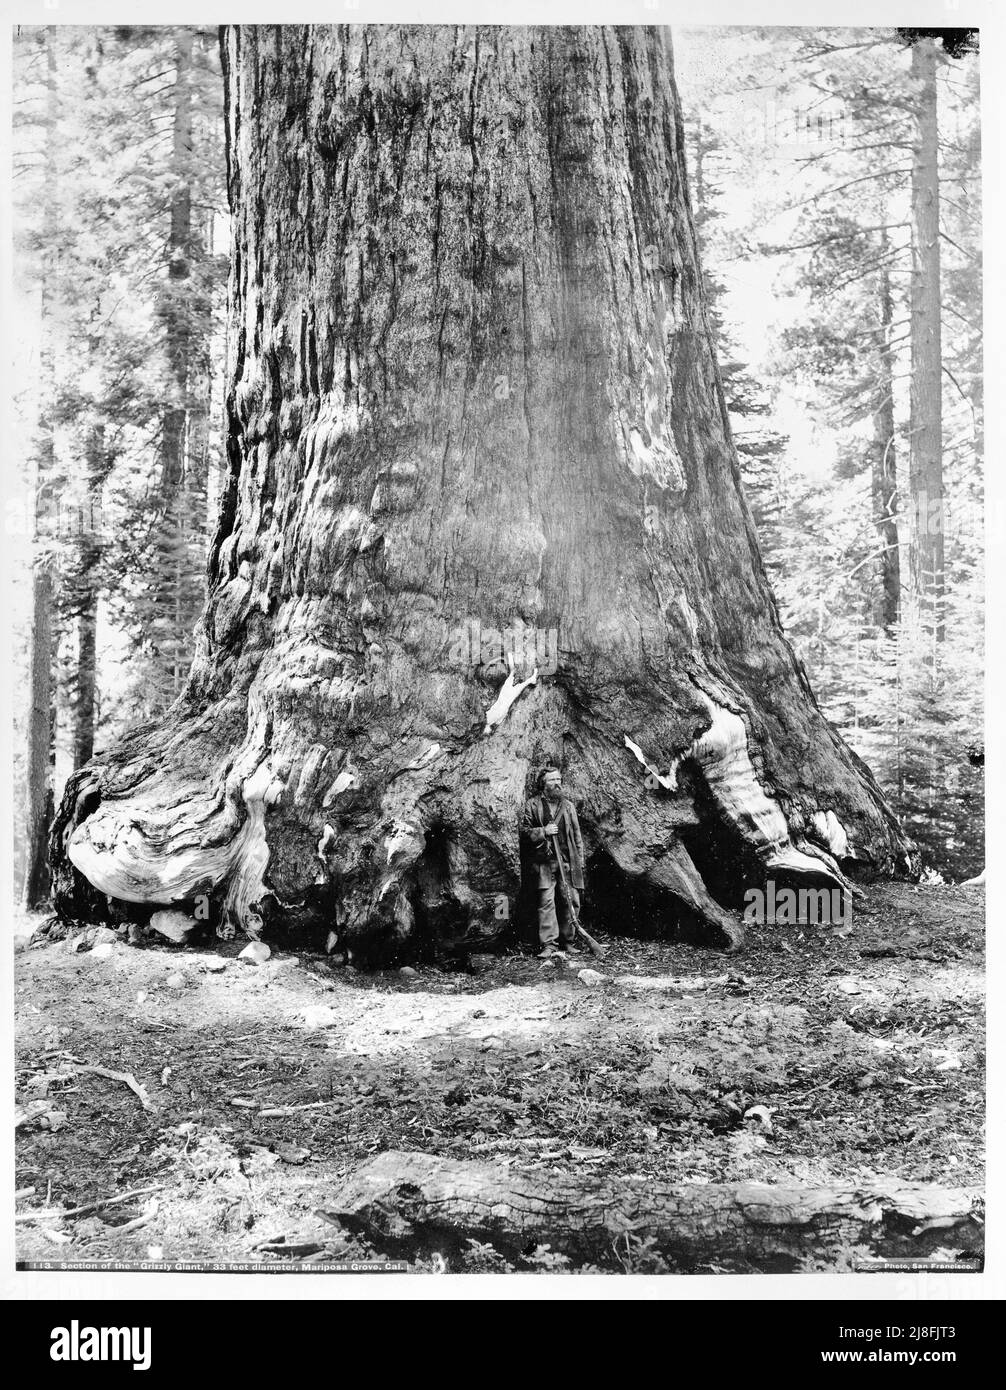 Isaiah West Taber - Section of the Grizzly Giant with Galen Clark, Mariposa Grove, Yosemite - 1865 Stock Photo